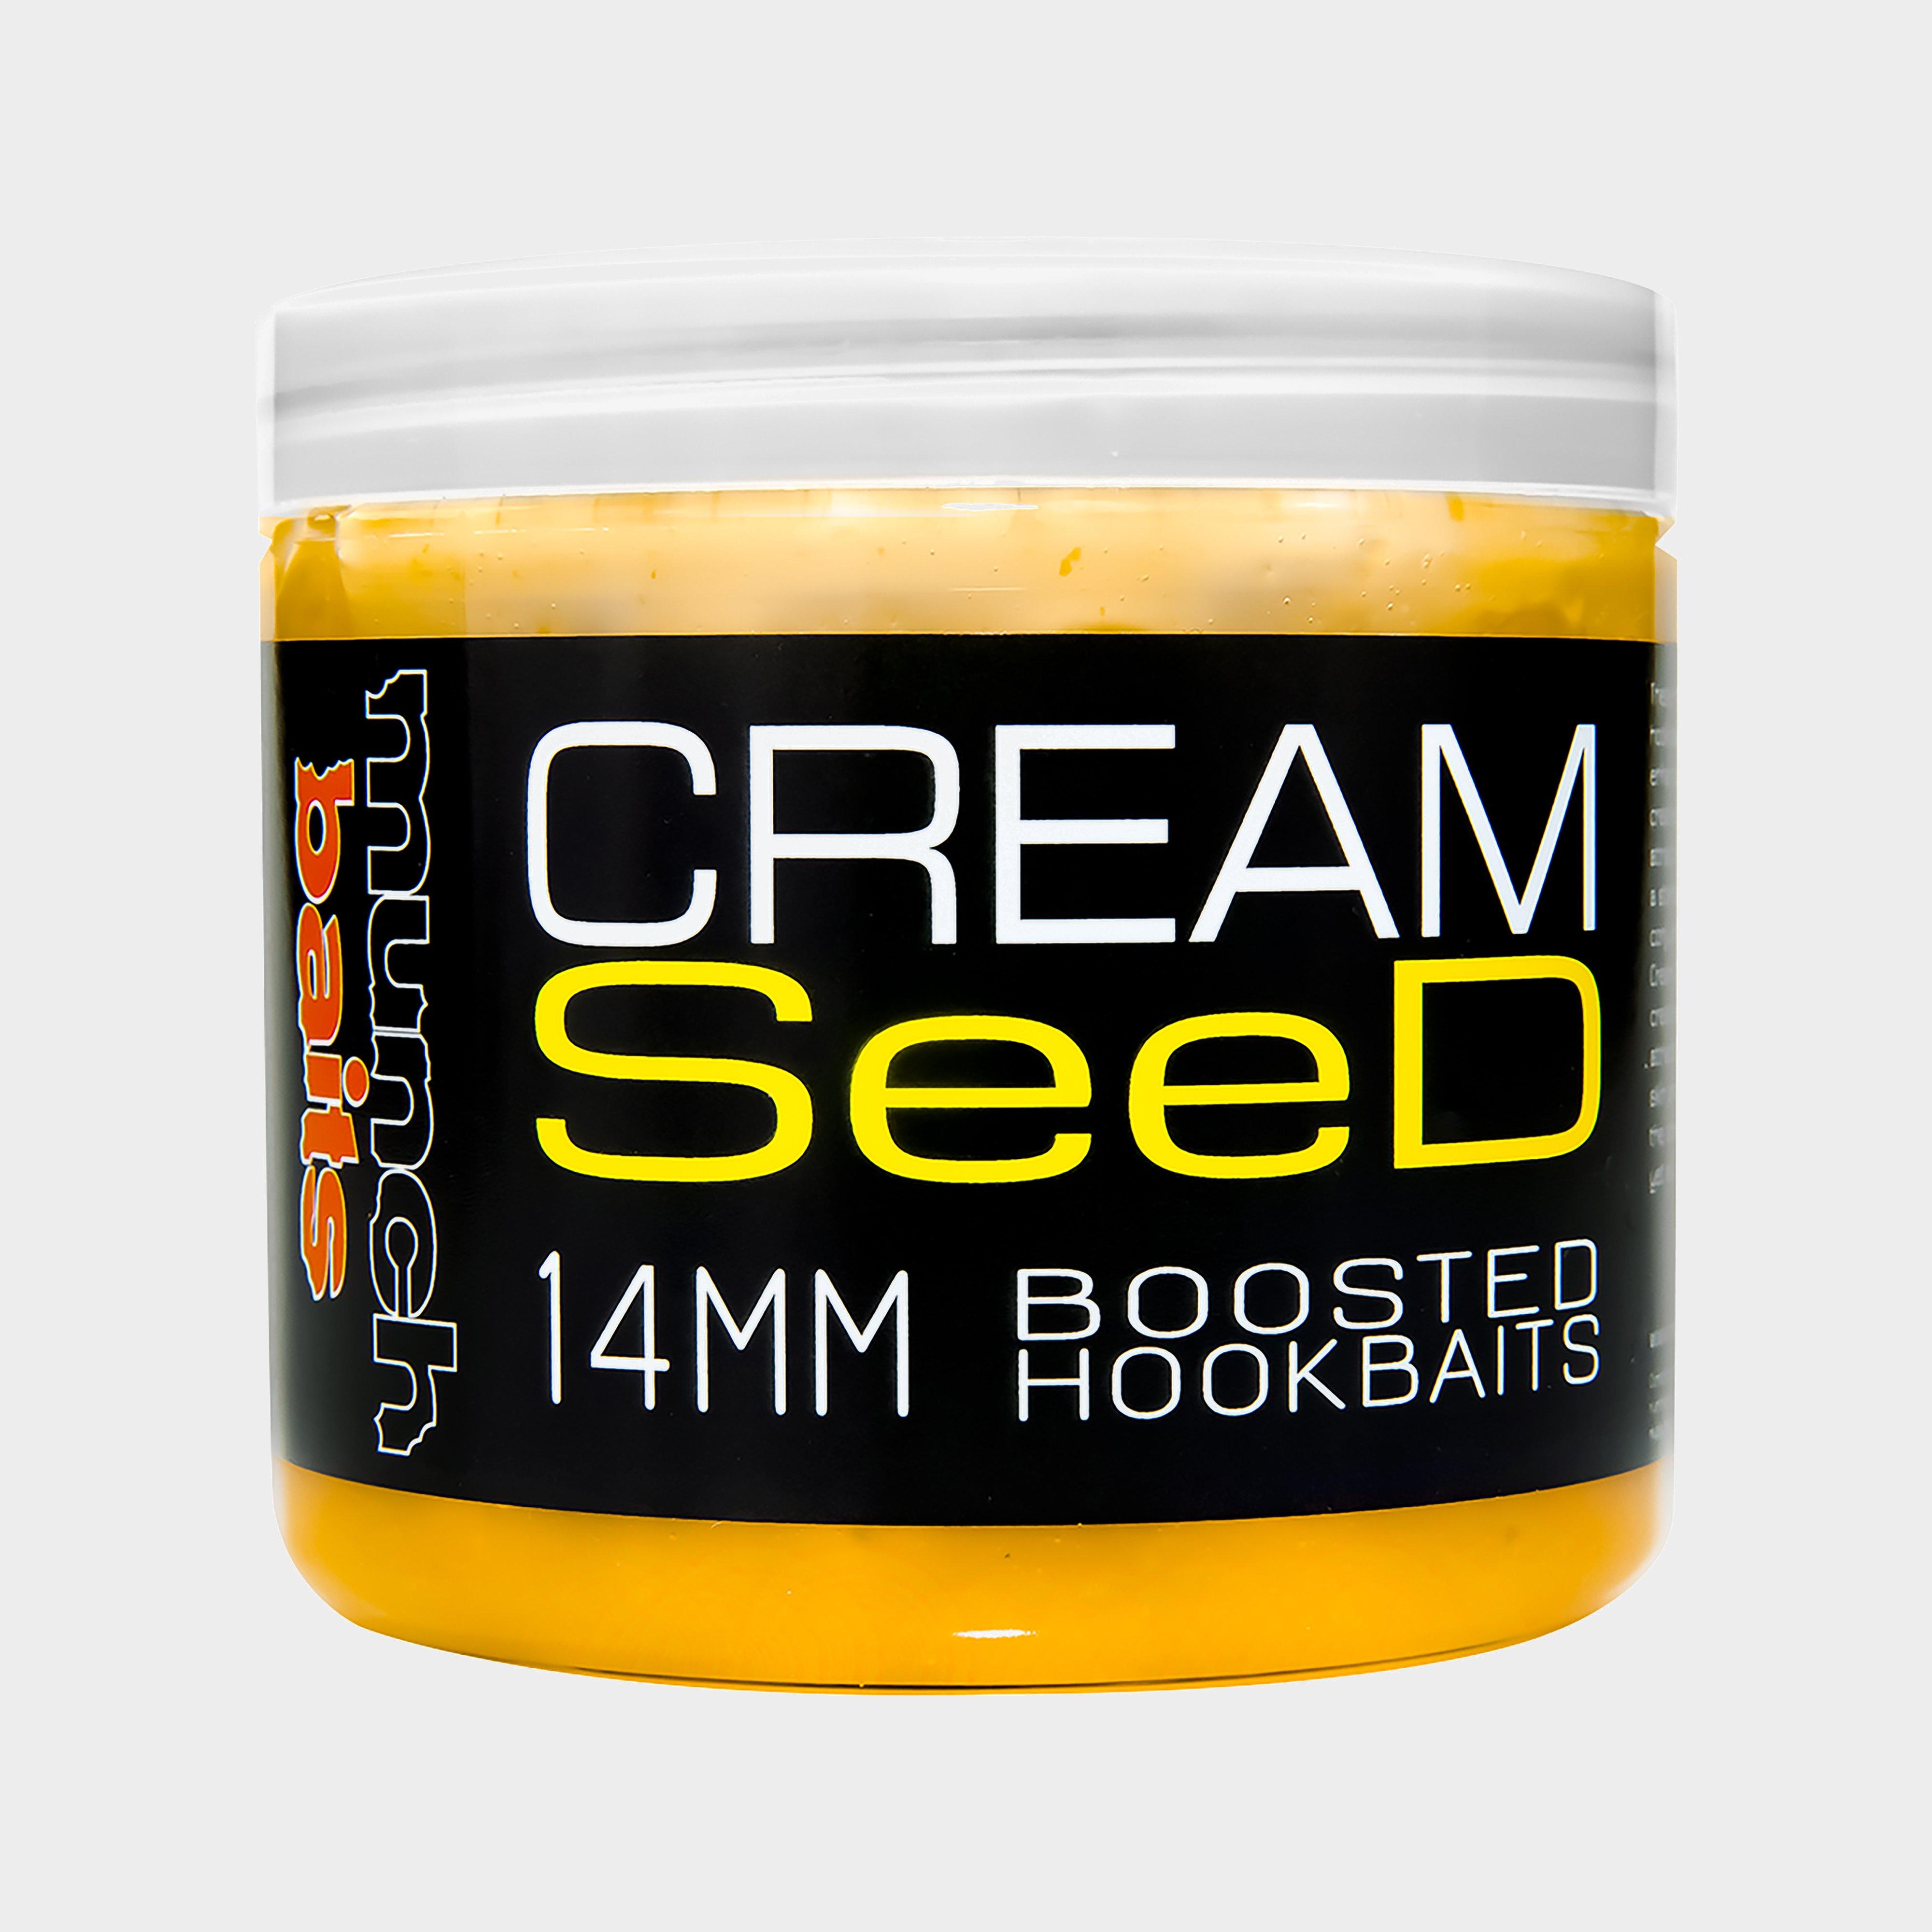 Munch Cream Seed Boosted Hooker 14mm